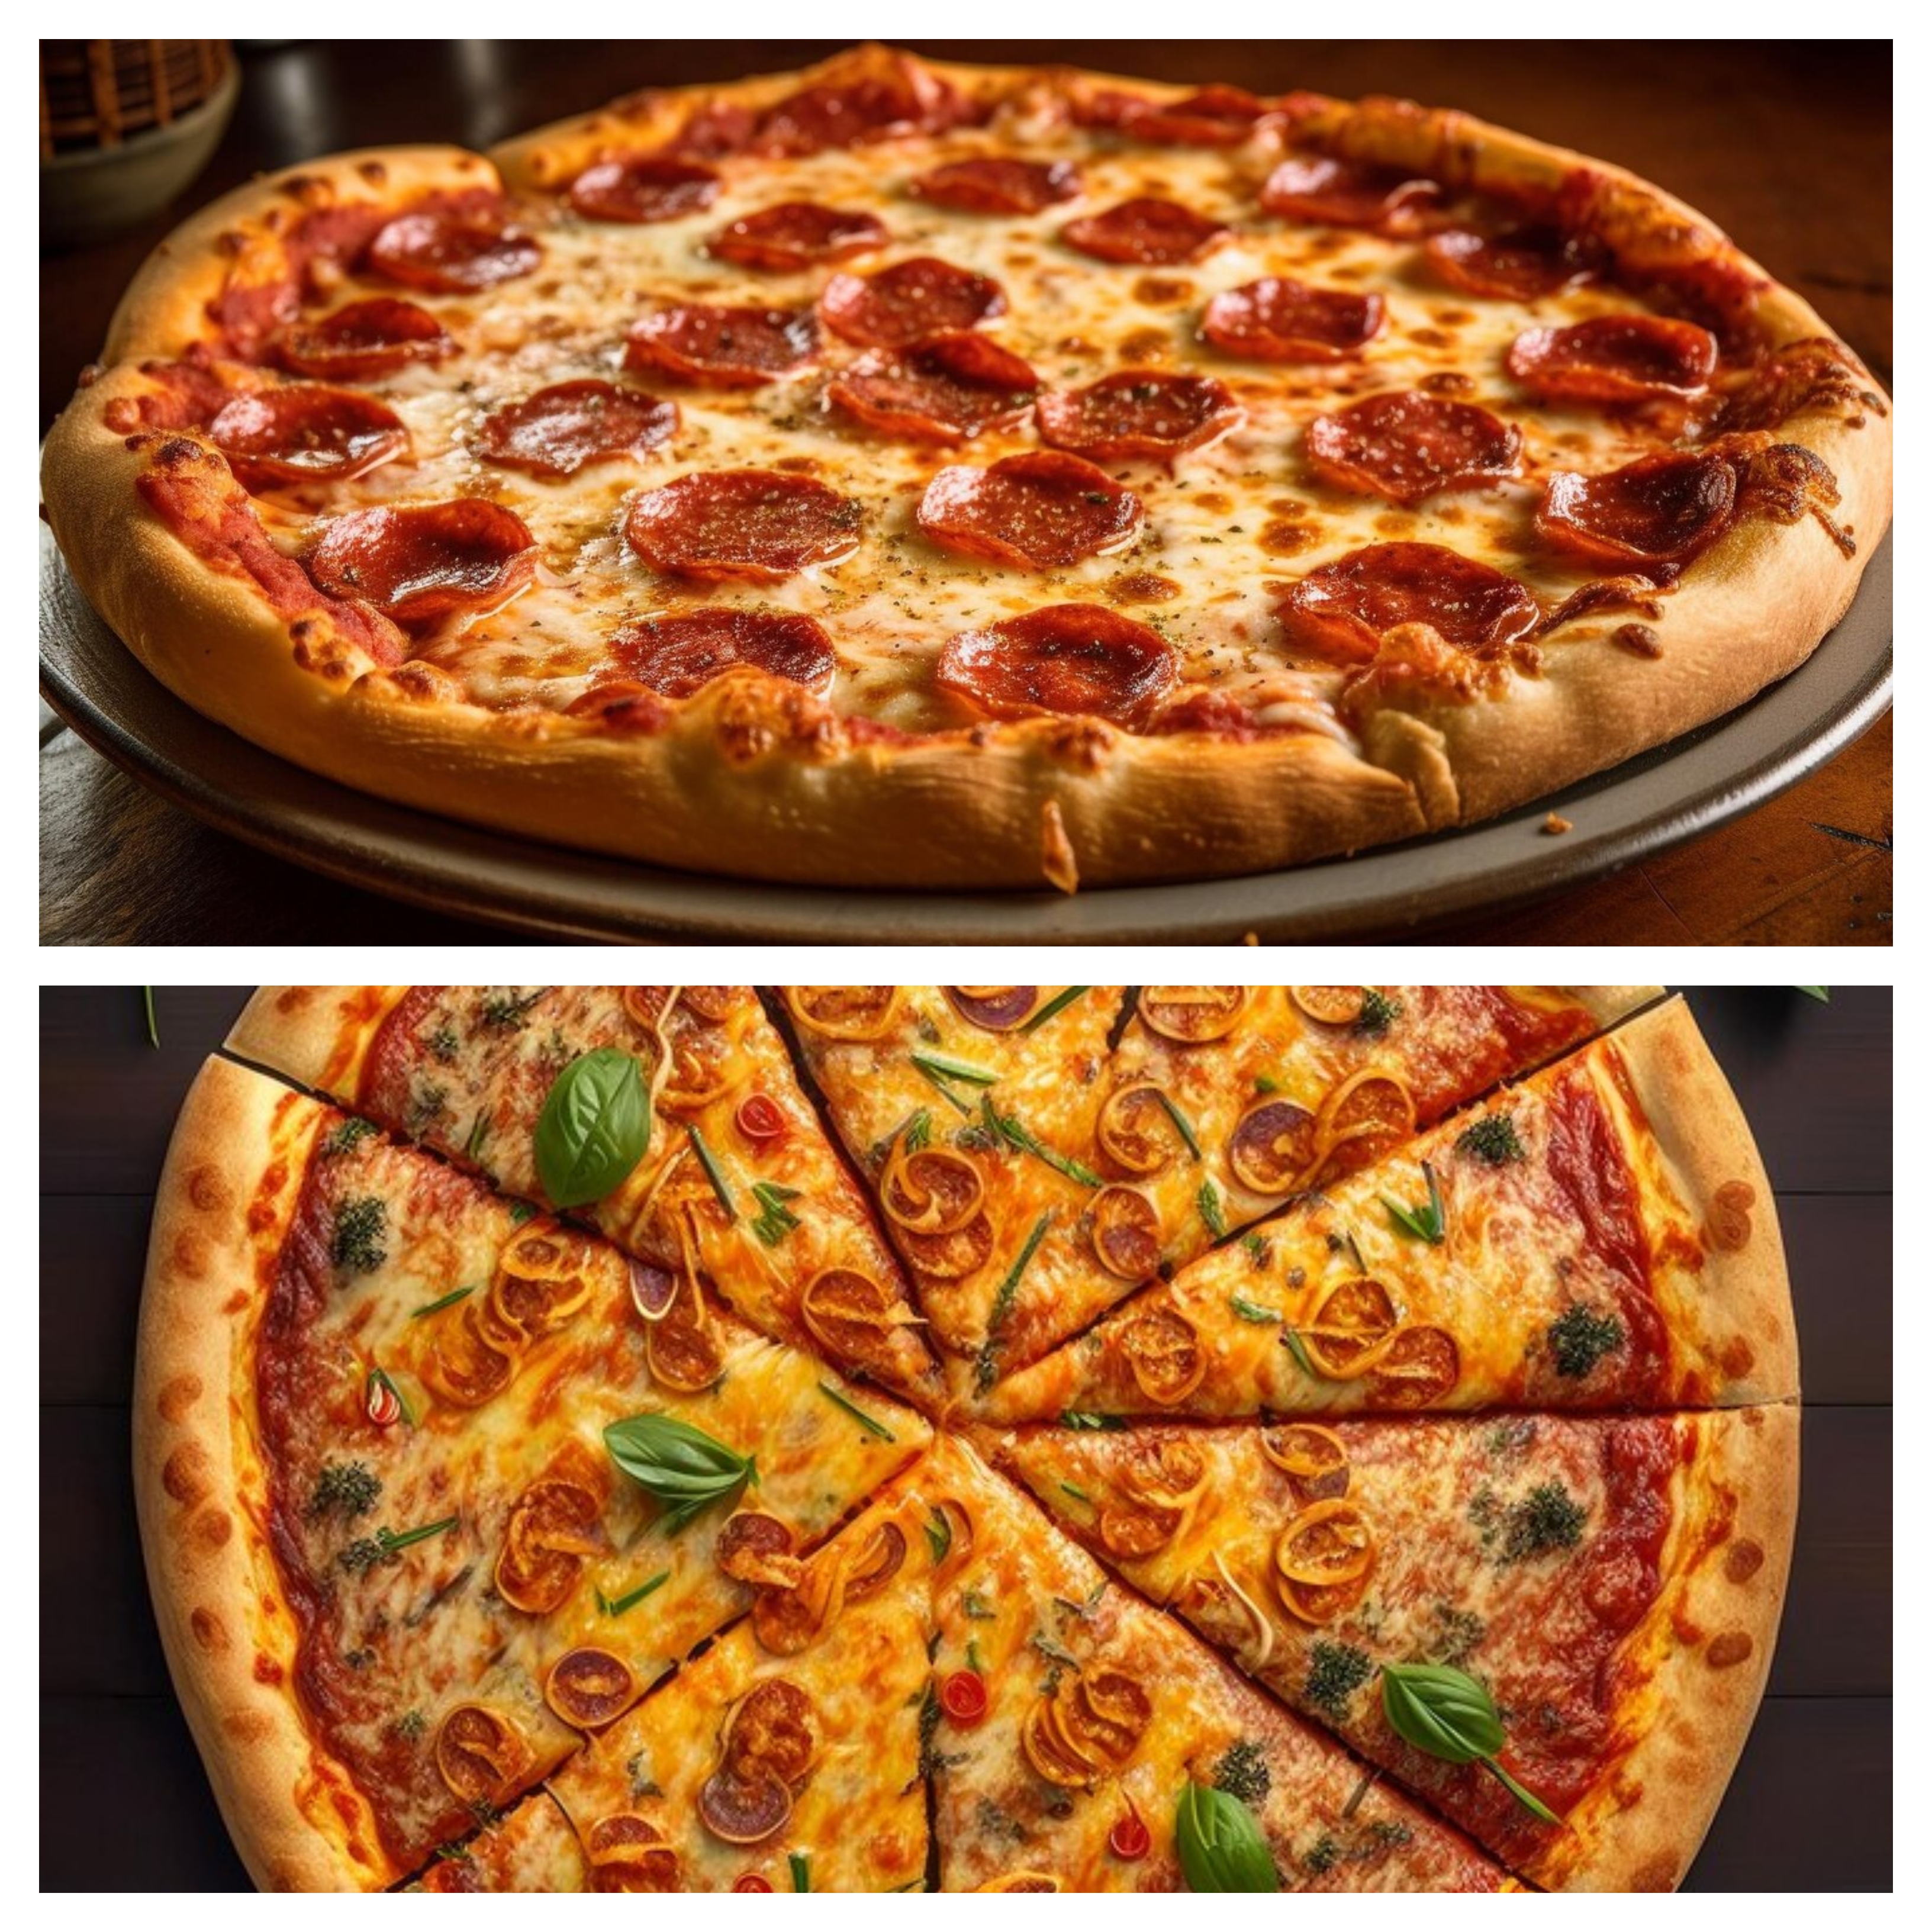 Pizza is the best pie